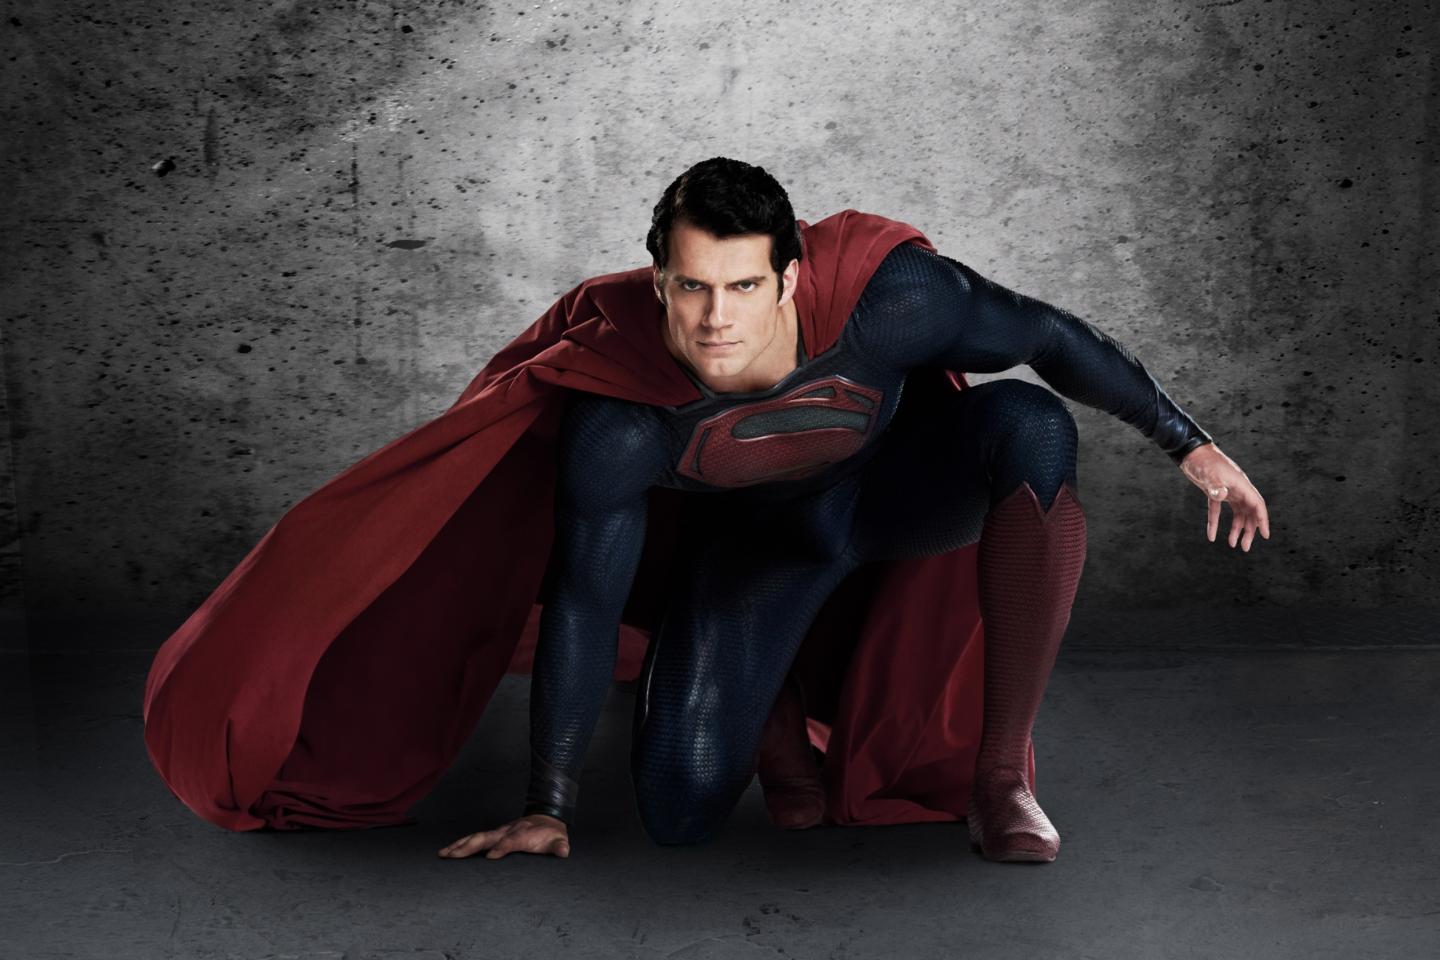 A world trhat needs hope: The Man of Steel! 